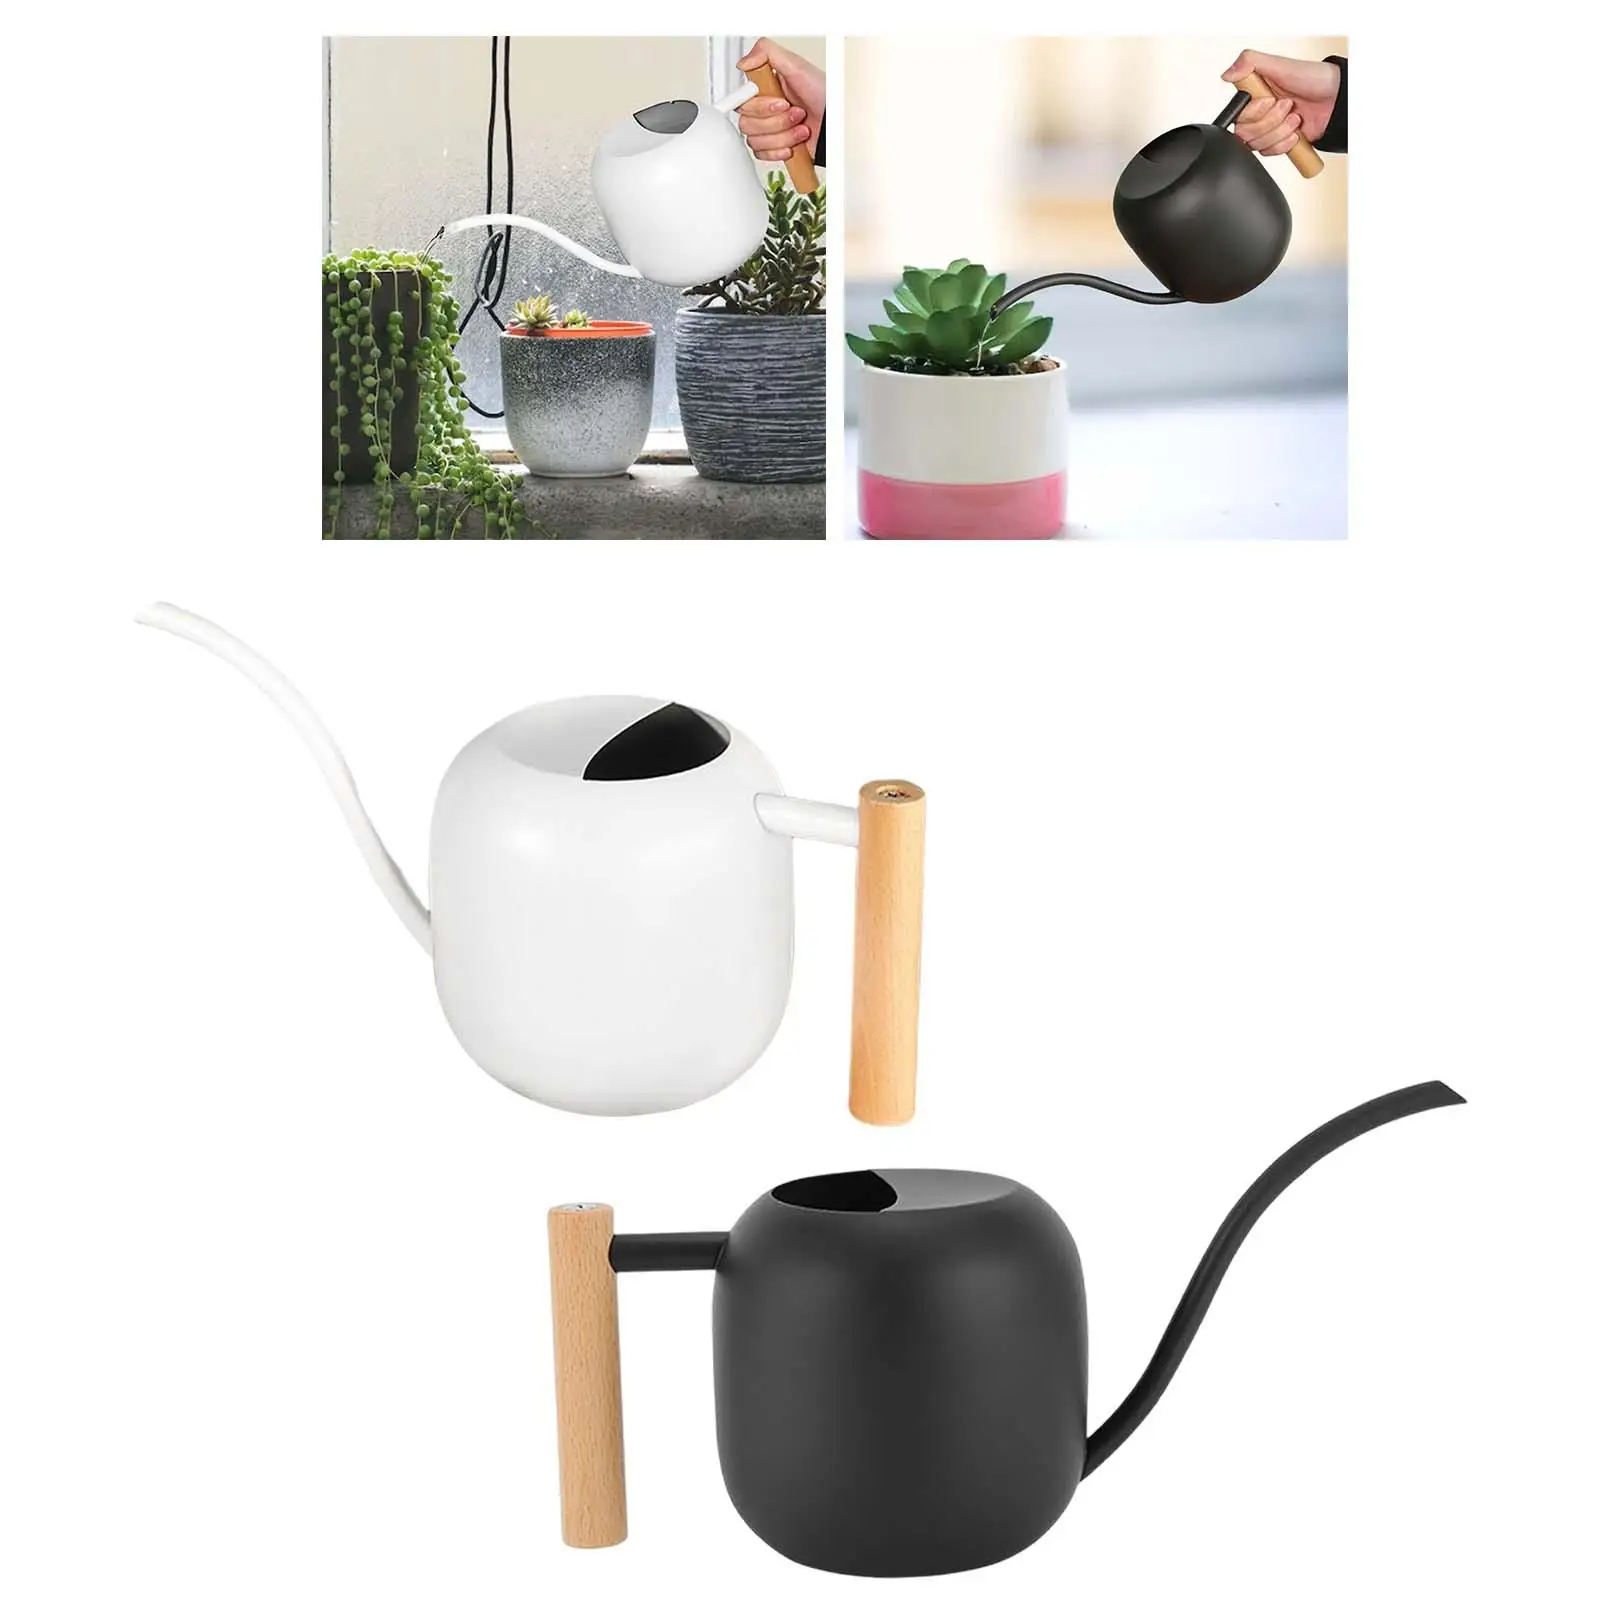 1.2L Watering Pot with Long Mouth Watering Can for Flower Shower Garden Yard Decorative